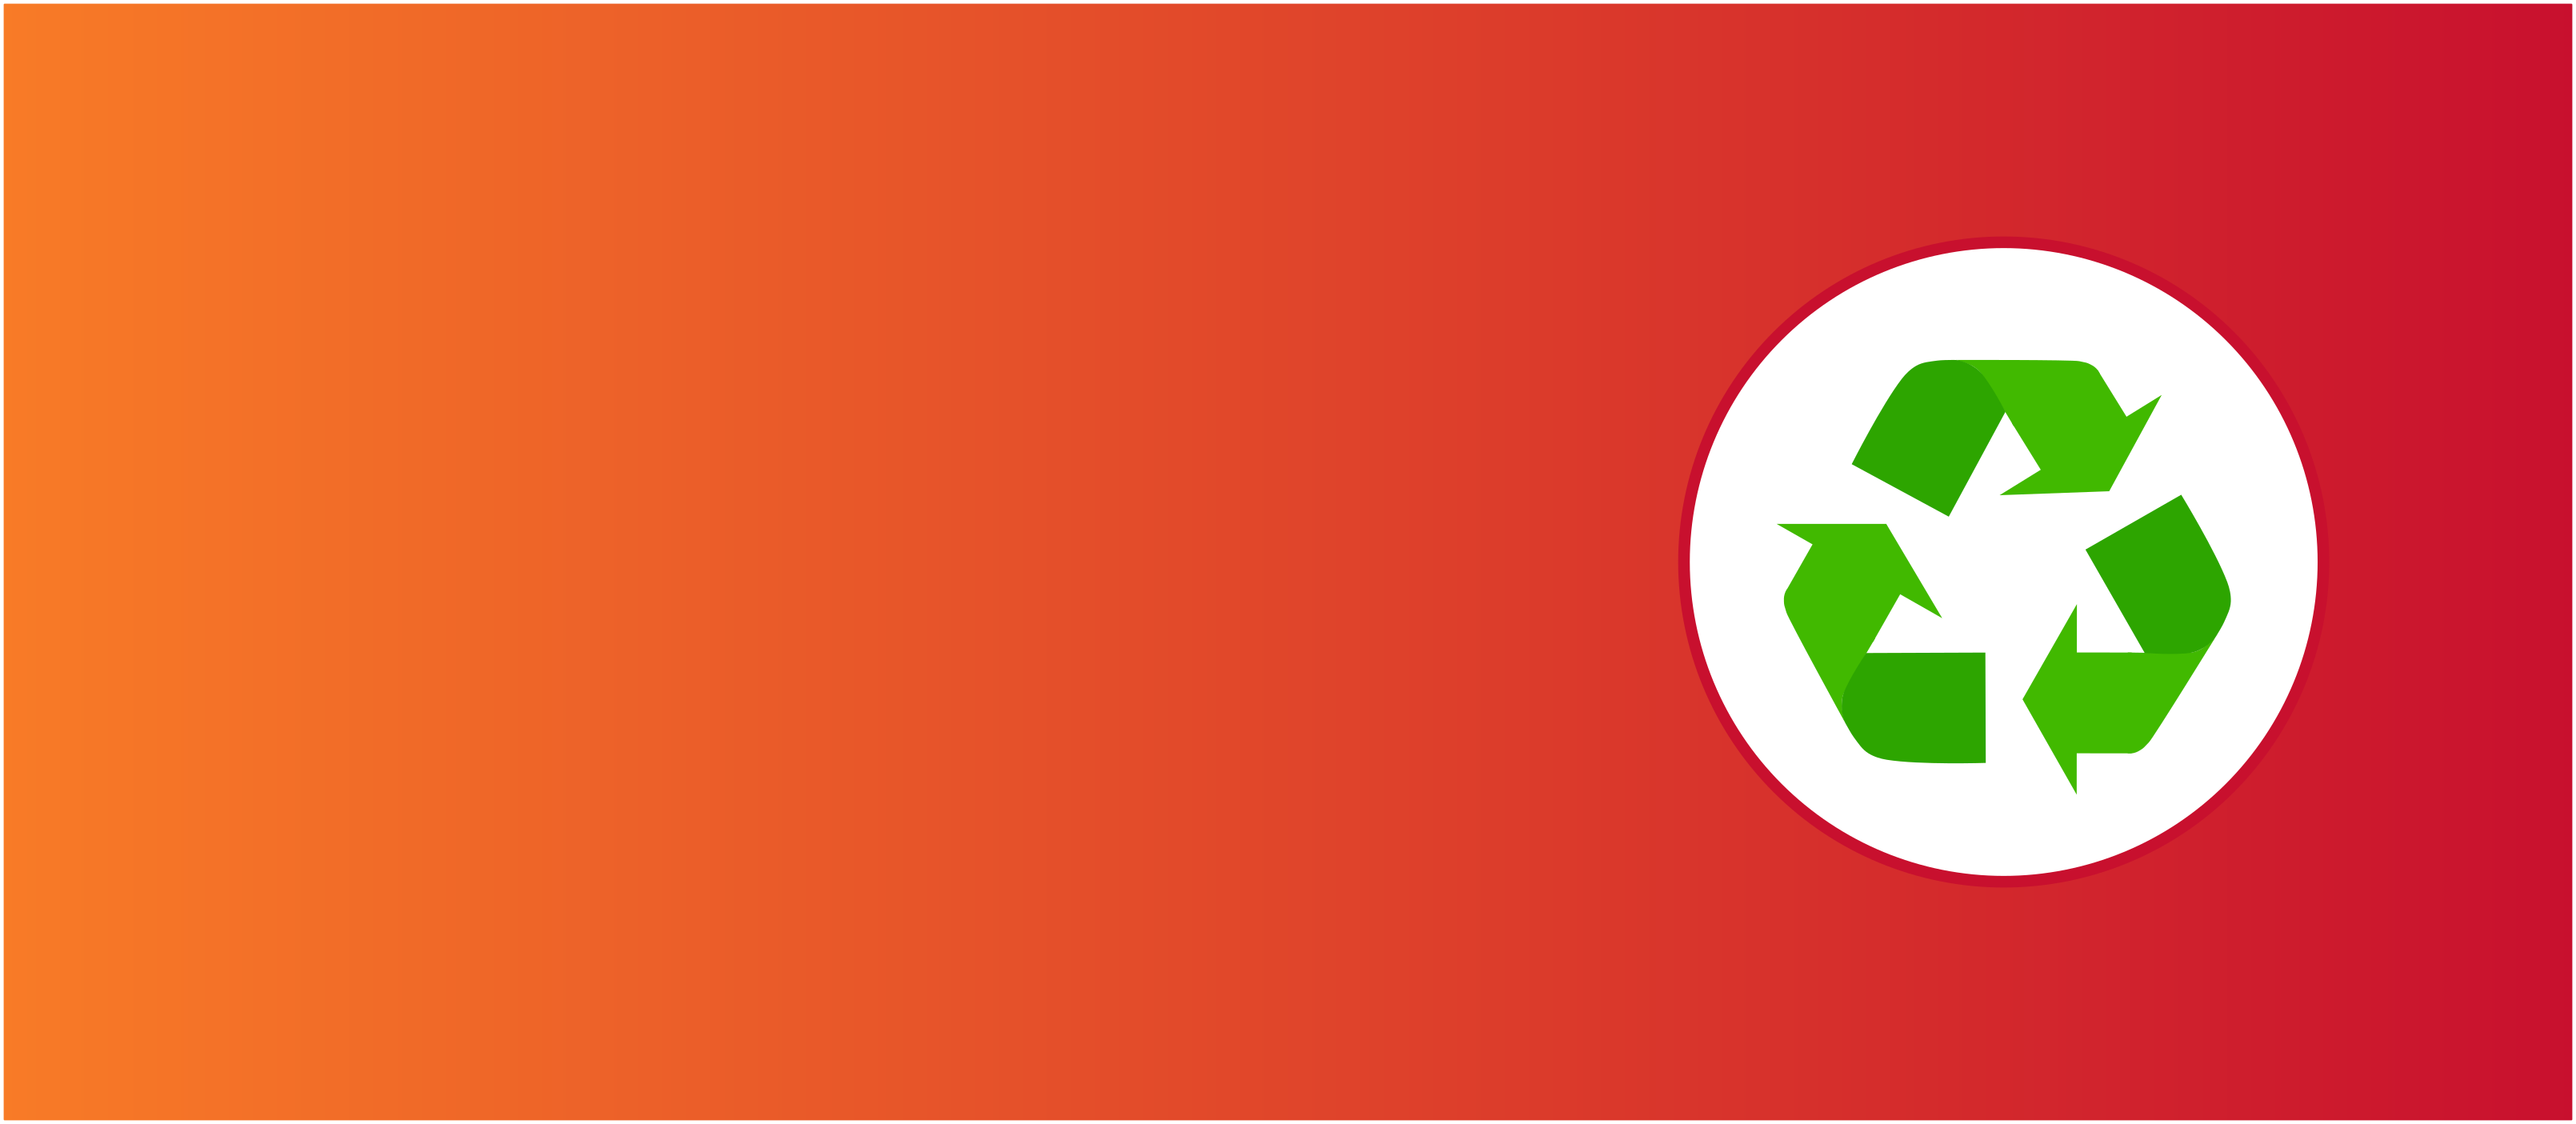 Icon of a green recycling sign on a background of orange-to-red gradient